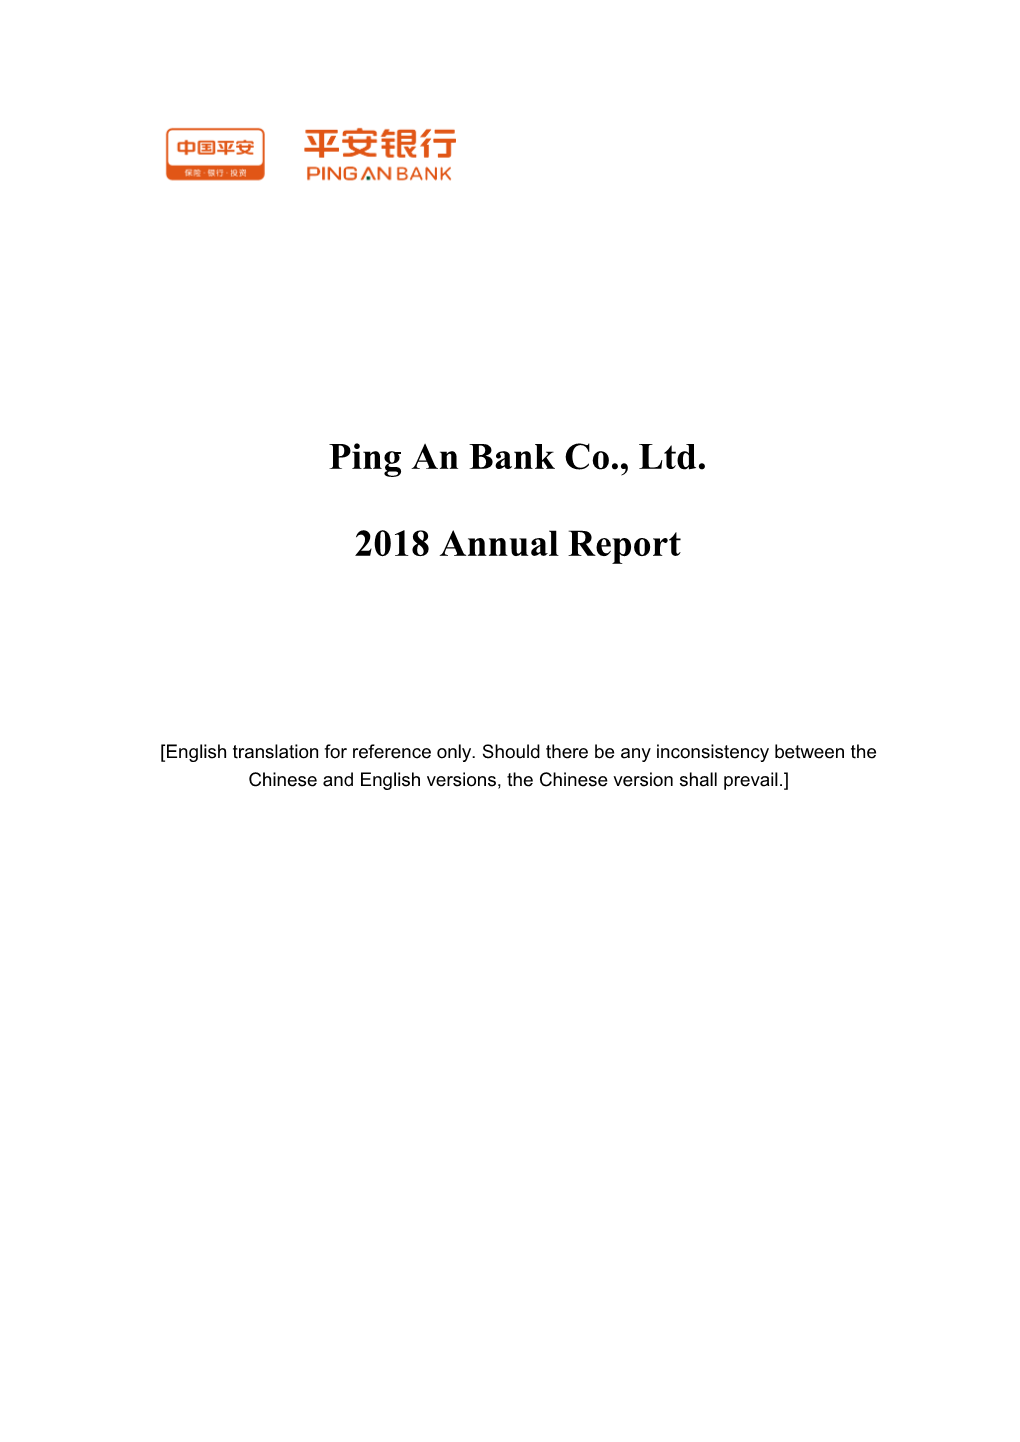 Ping an Bank Co., Ltd. 2018 Annual Report